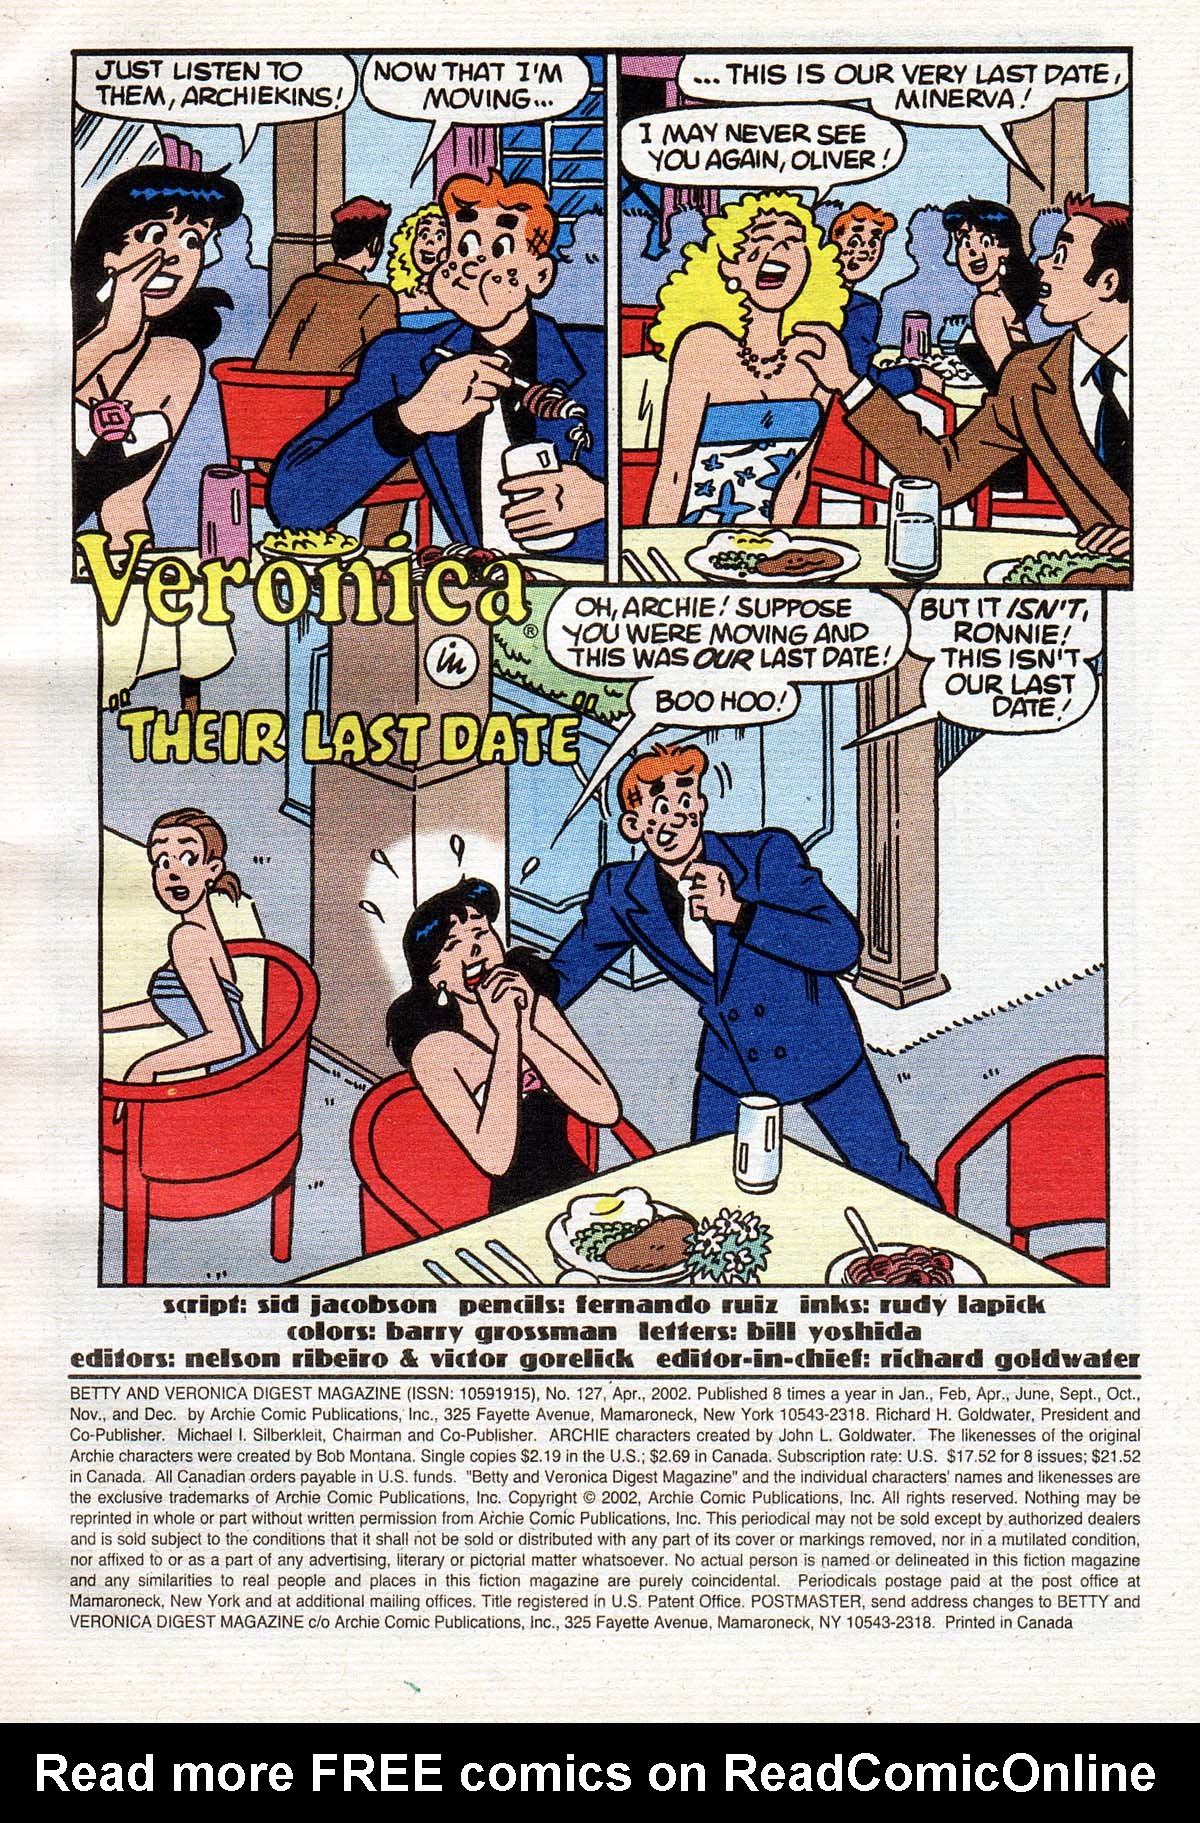 Betty And Veronica Digest Magazine Issue 127 | Read Betty And Veronica  Digest Magazine Issue 127 comic online in high quality. Read Full Comic  online for free - Read comics online in